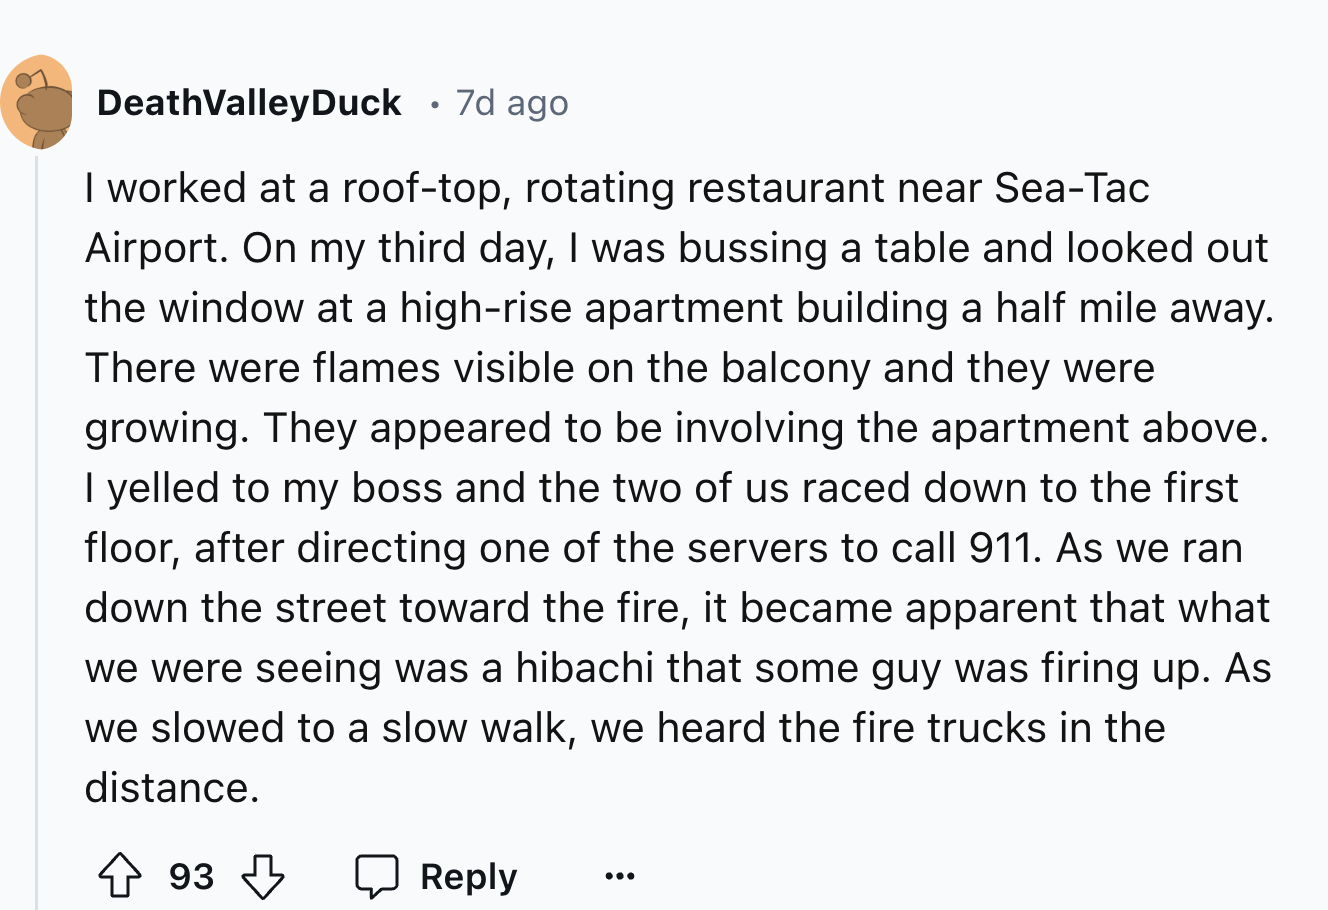 screenshot - DeathValleyDuck 7d ago I worked at a rooftop, rotating restaurant near SeaTac Airport. On my third day, I was bussing a table and looked out the window at a highrise apartment building a half mile away. There were flames visible on the balcon